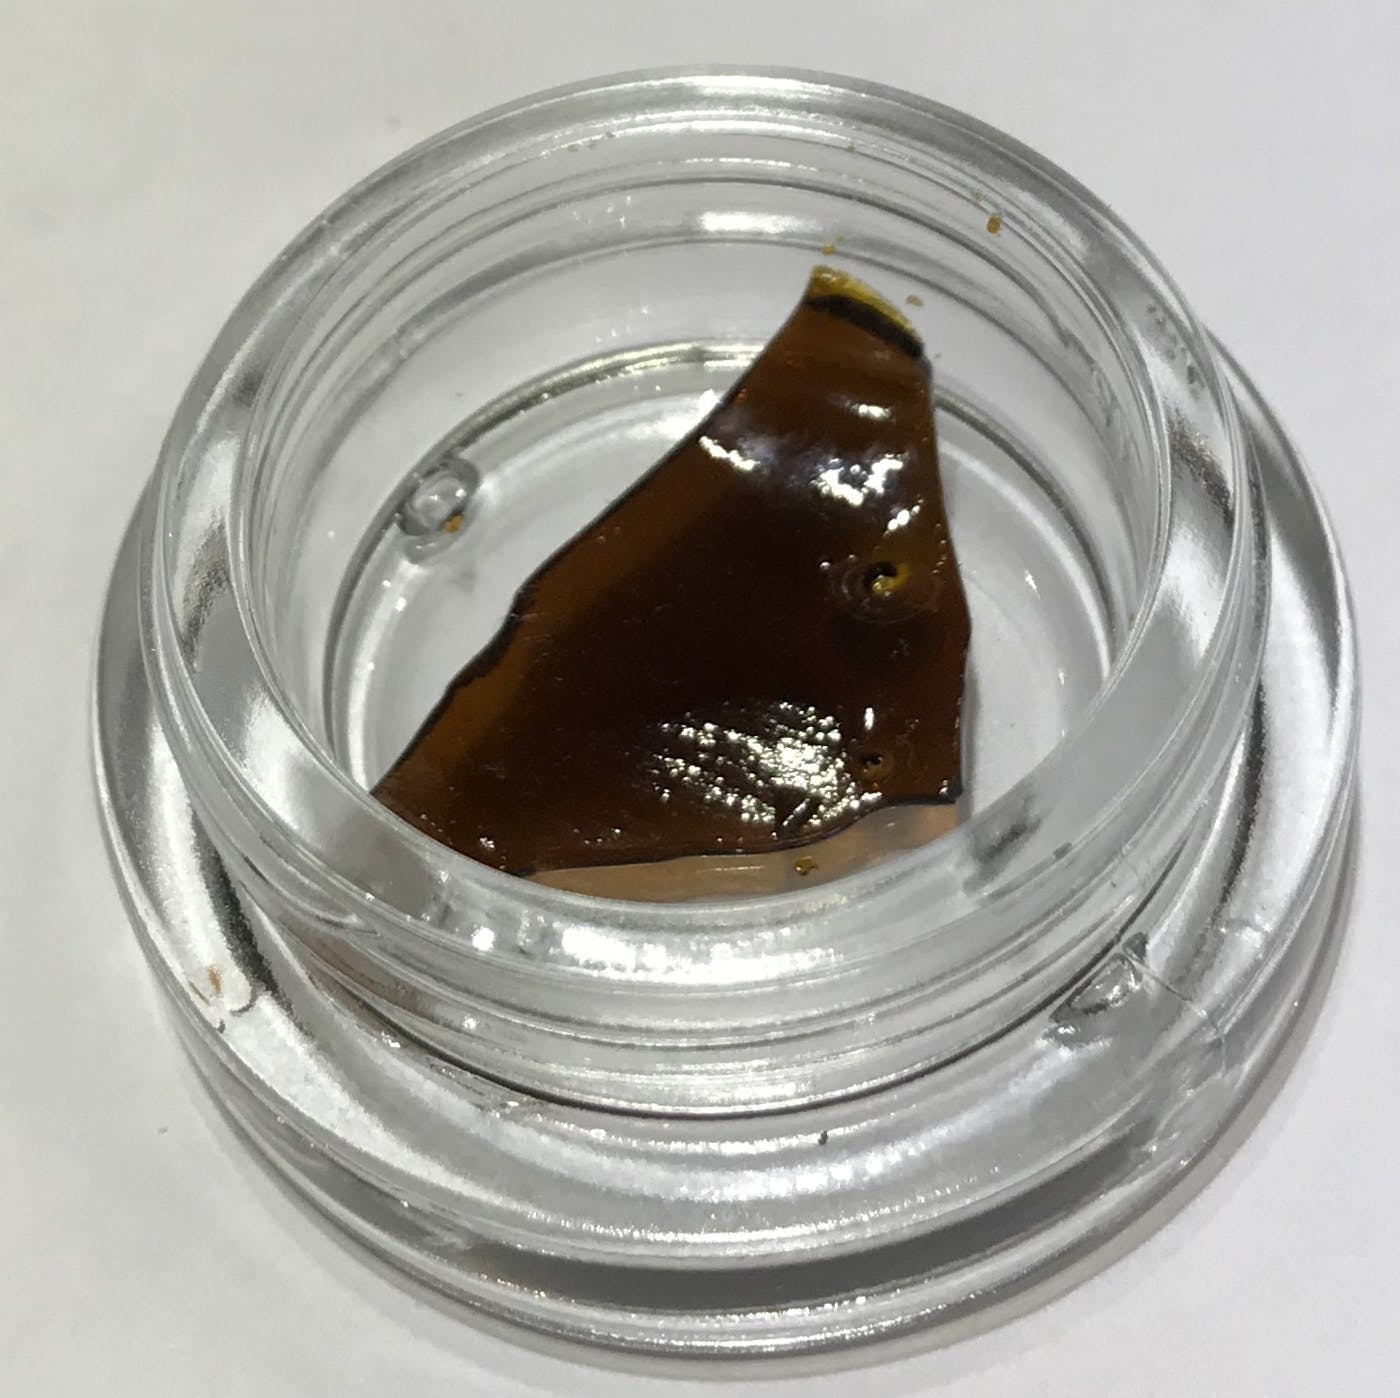 Savage Grape God 0.5g Shatter by Canamo Concentrates